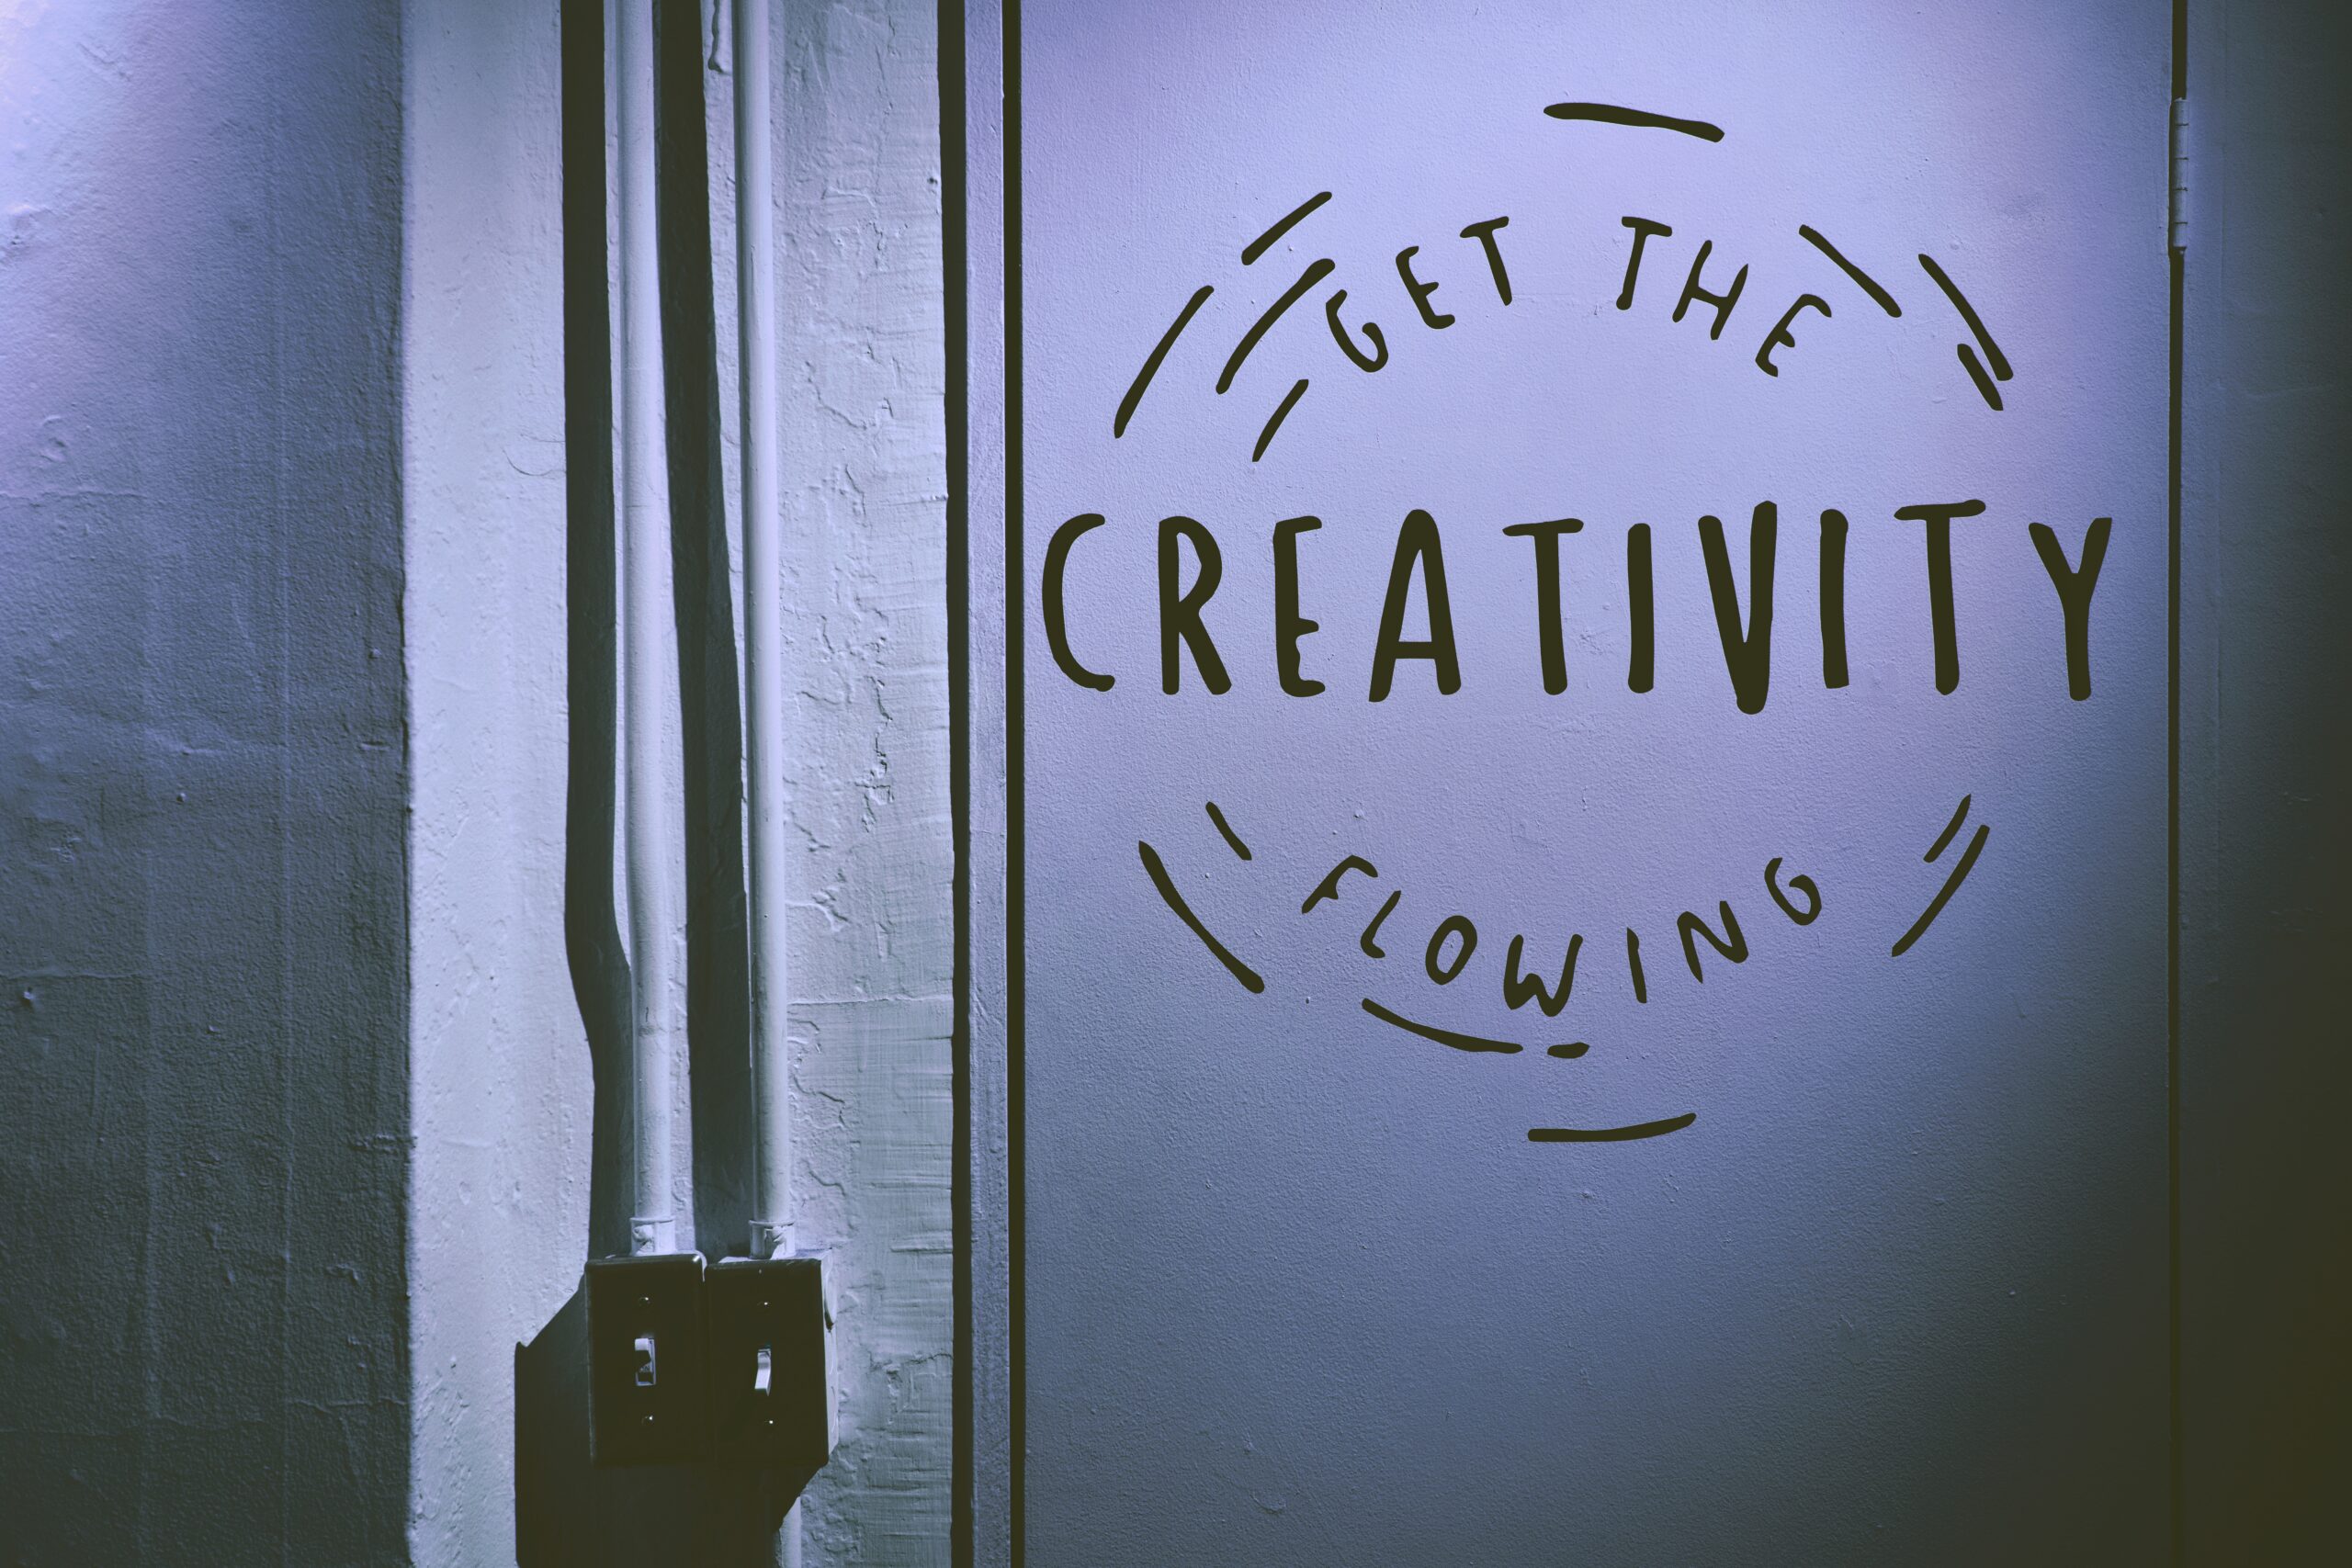 Creativity Is a Process, Not an Event: What does this mean